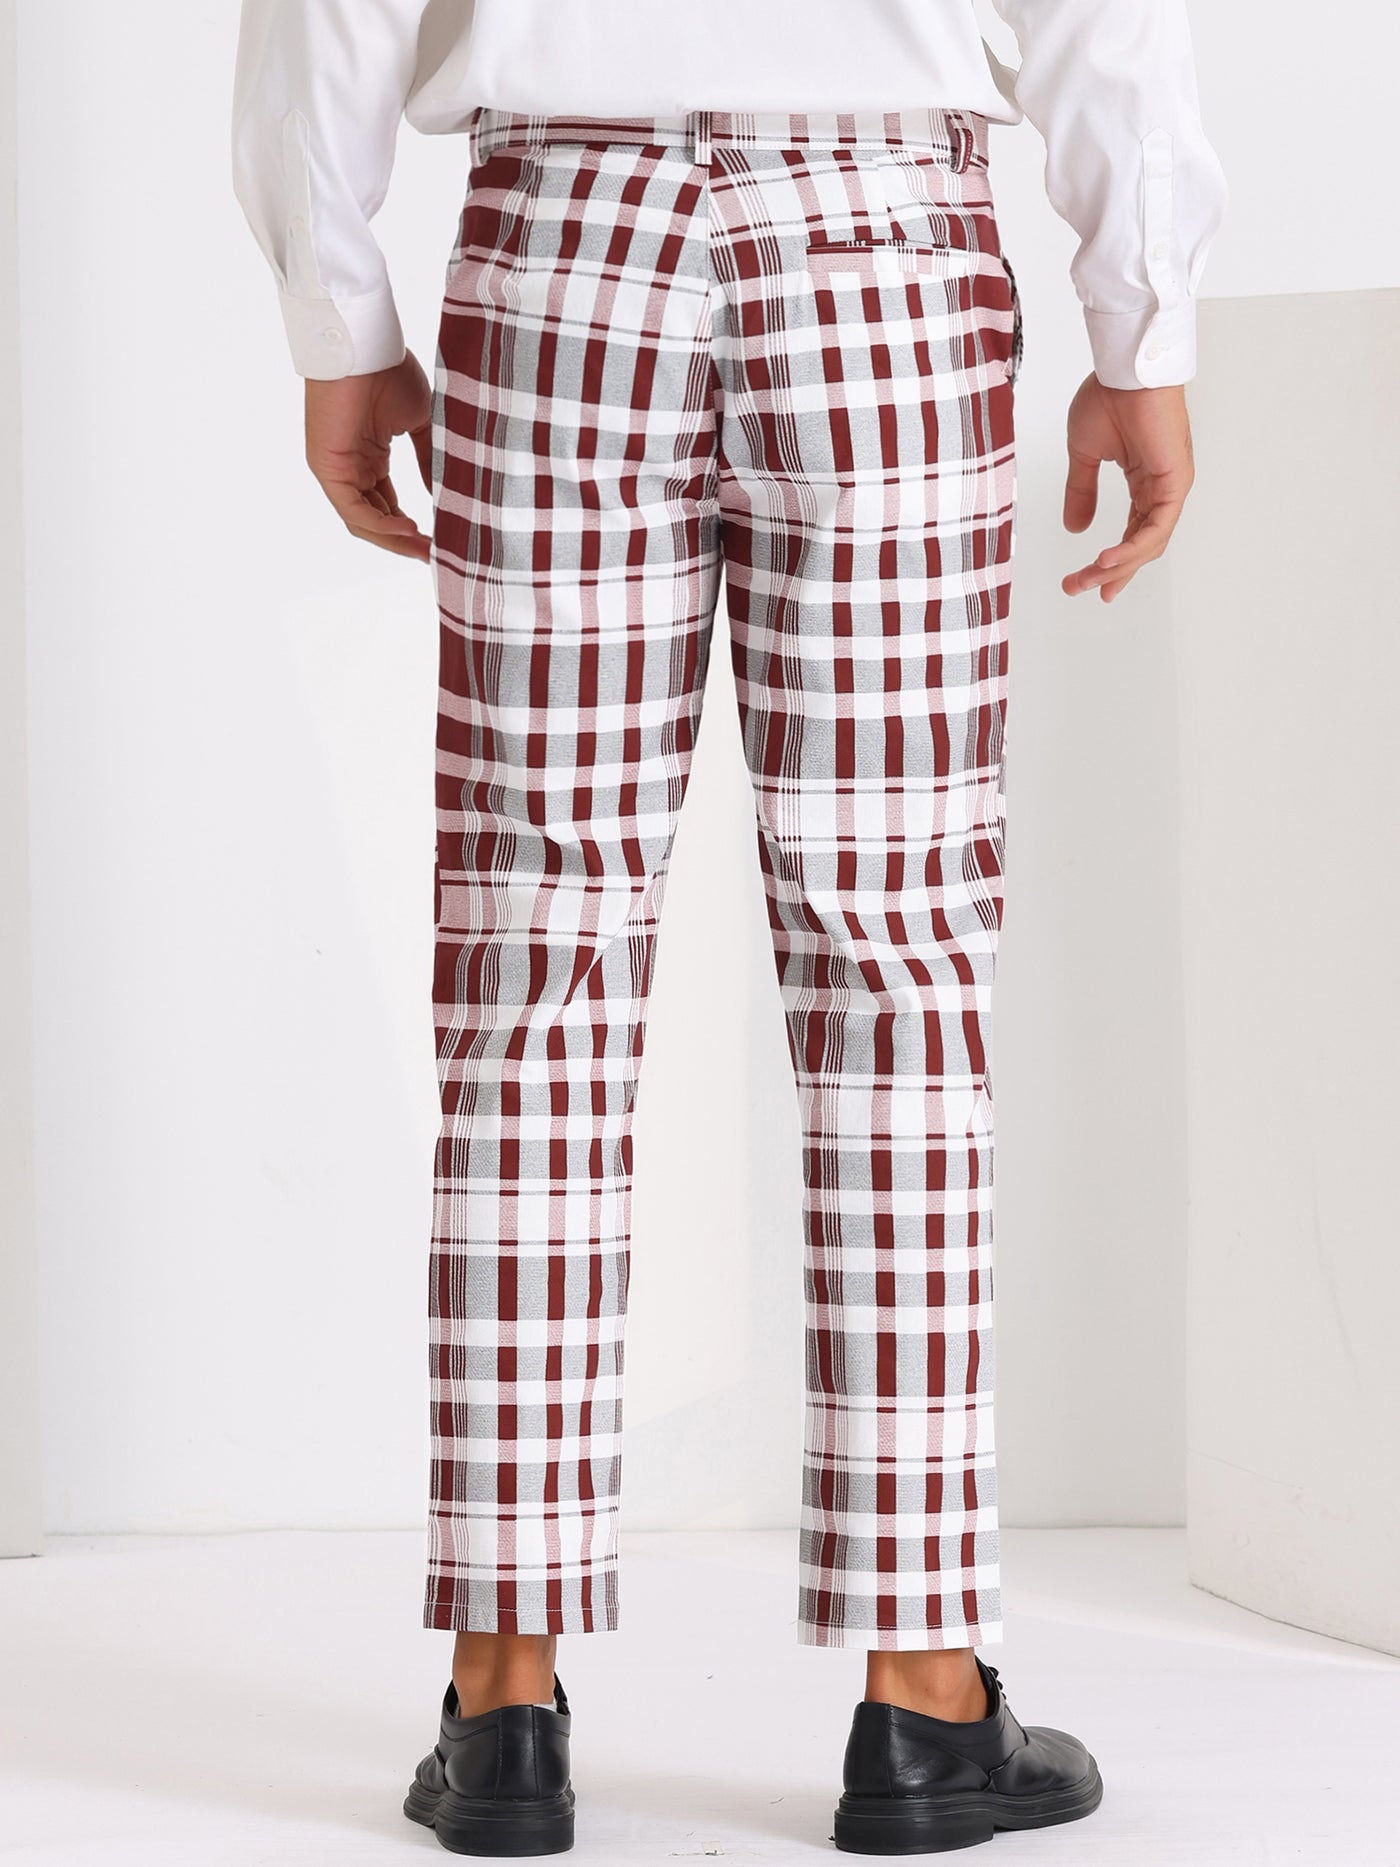 Bublédon Plaid Dress Pants for Men's Slim Fit Flat Front Stretch Tapered Checked Trousers